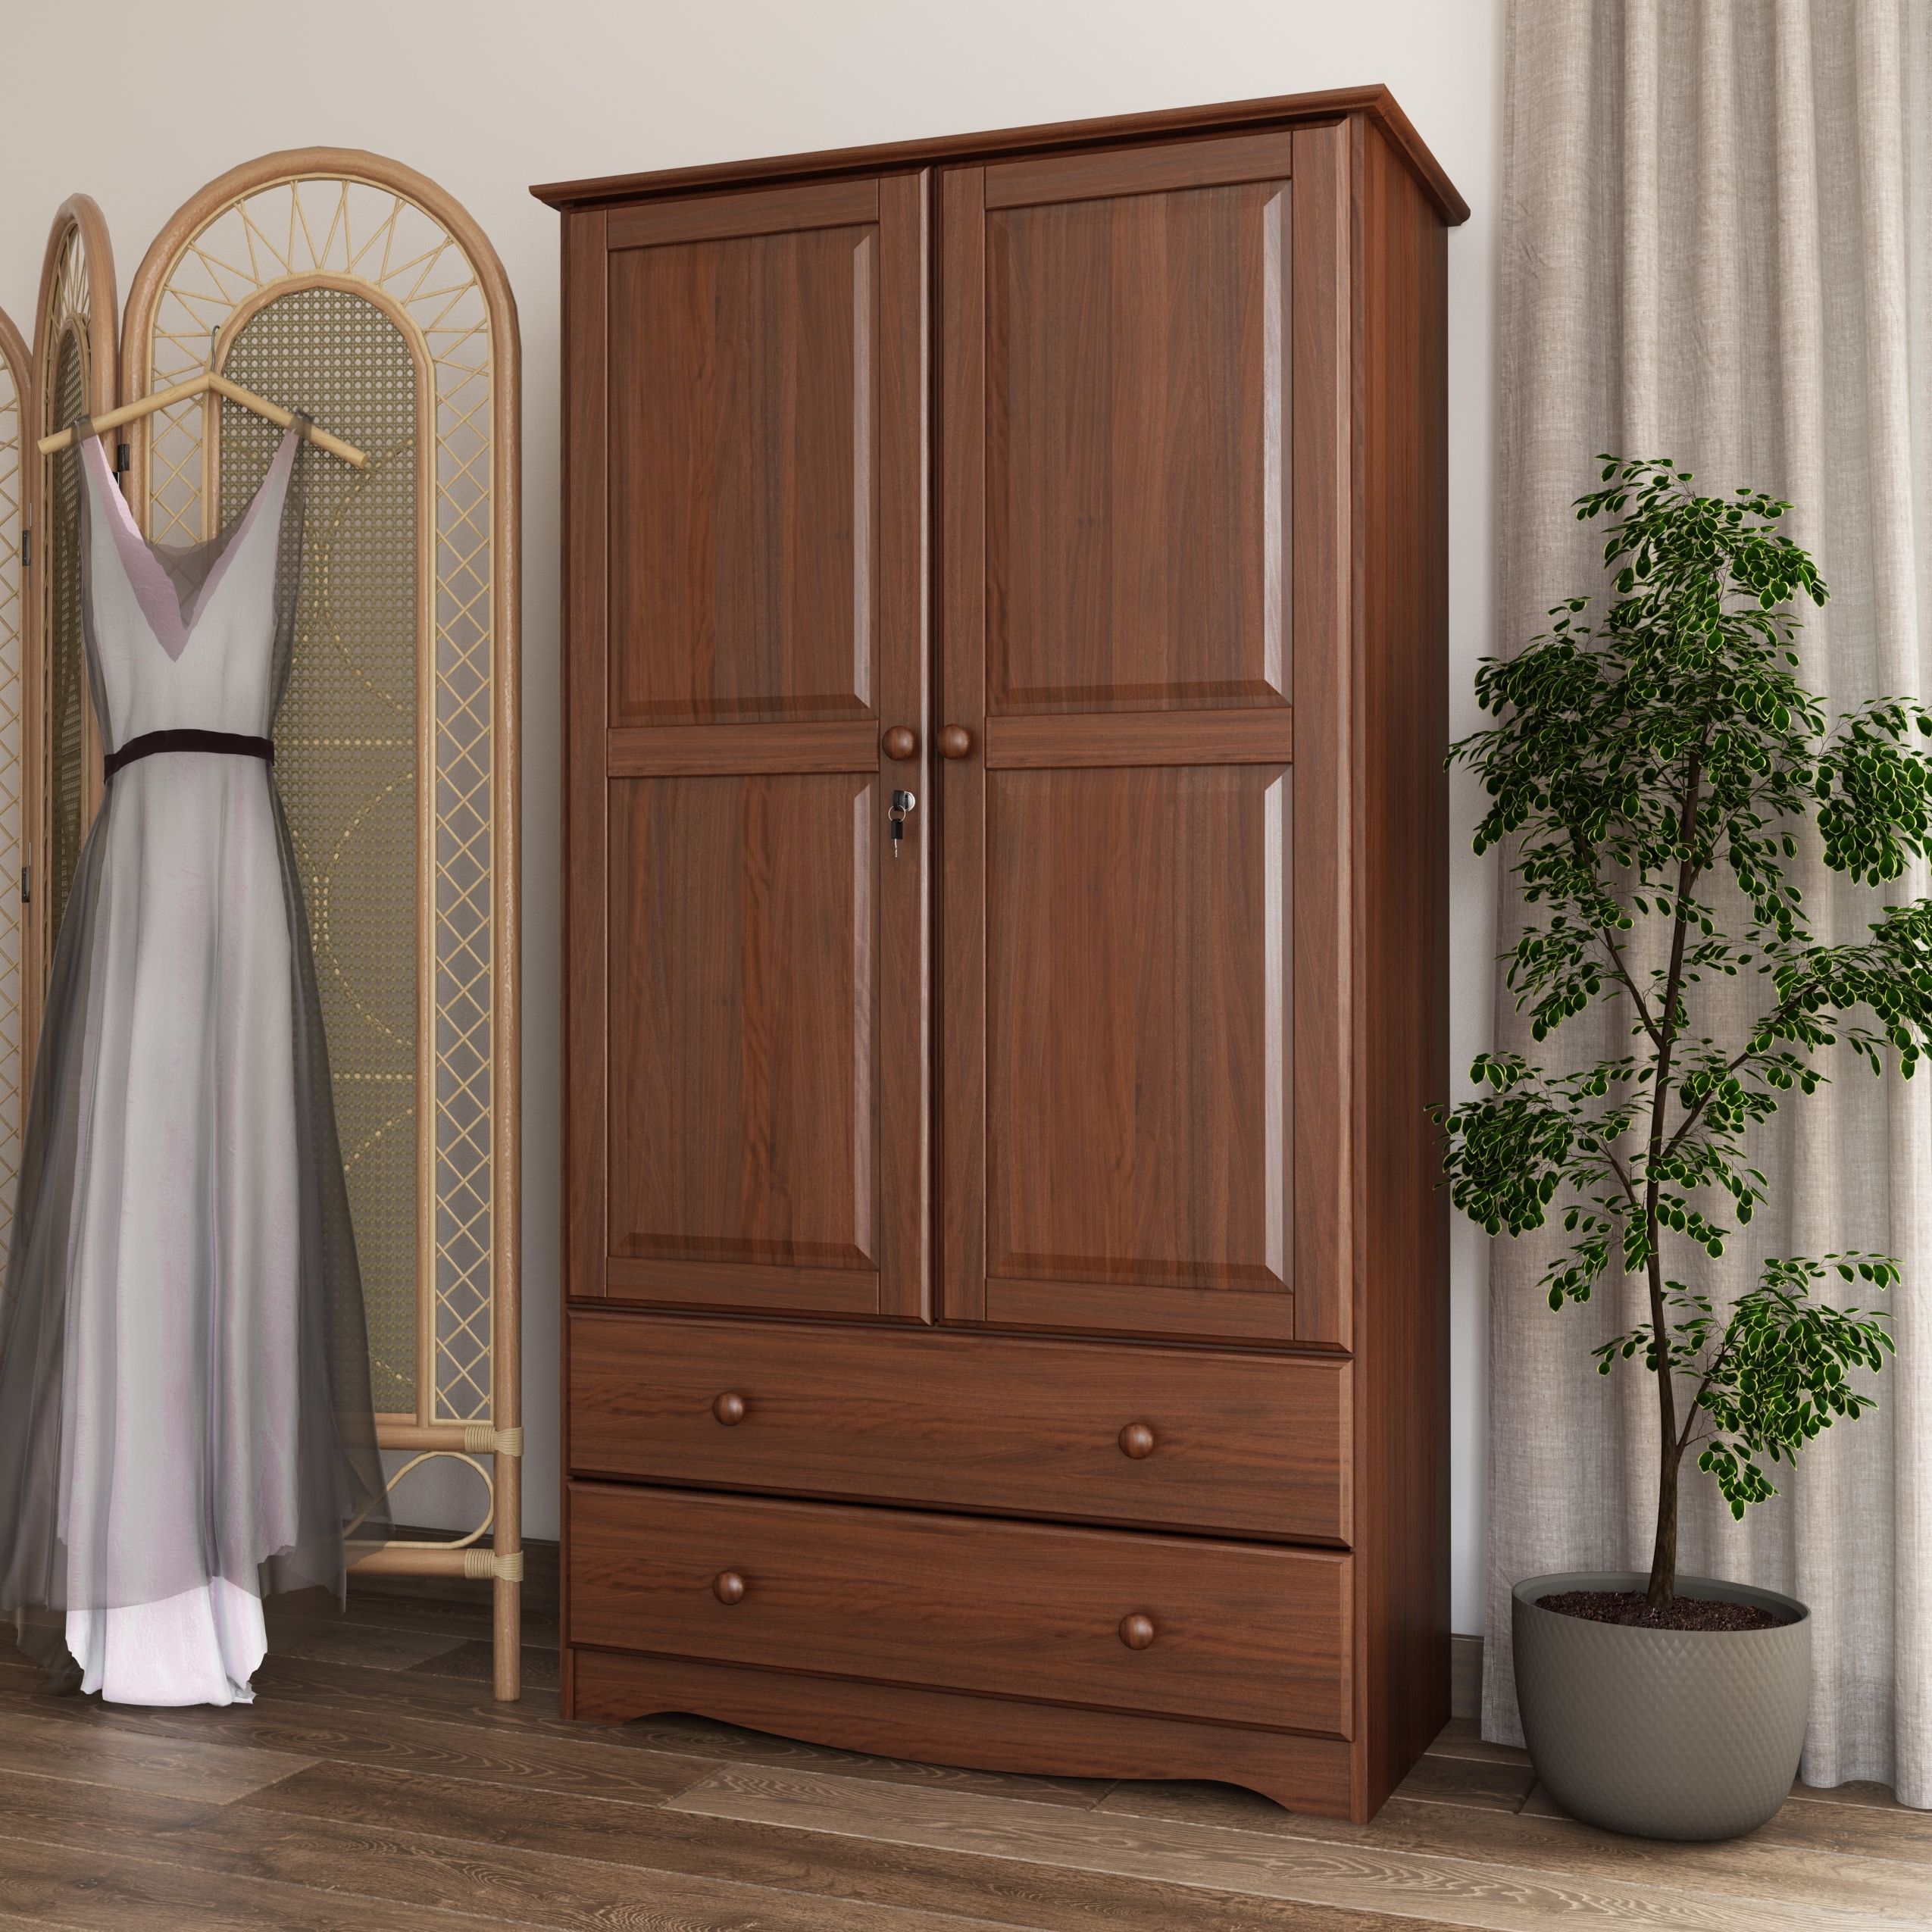 Palace Imports 100% Solid Wood Smart Wardrobe Armoire With 2 Drawers – Bed  Bath & Beyond – 12096940 Inside Single Oak Wardrobes With Drawers (Gallery 16 of 20)